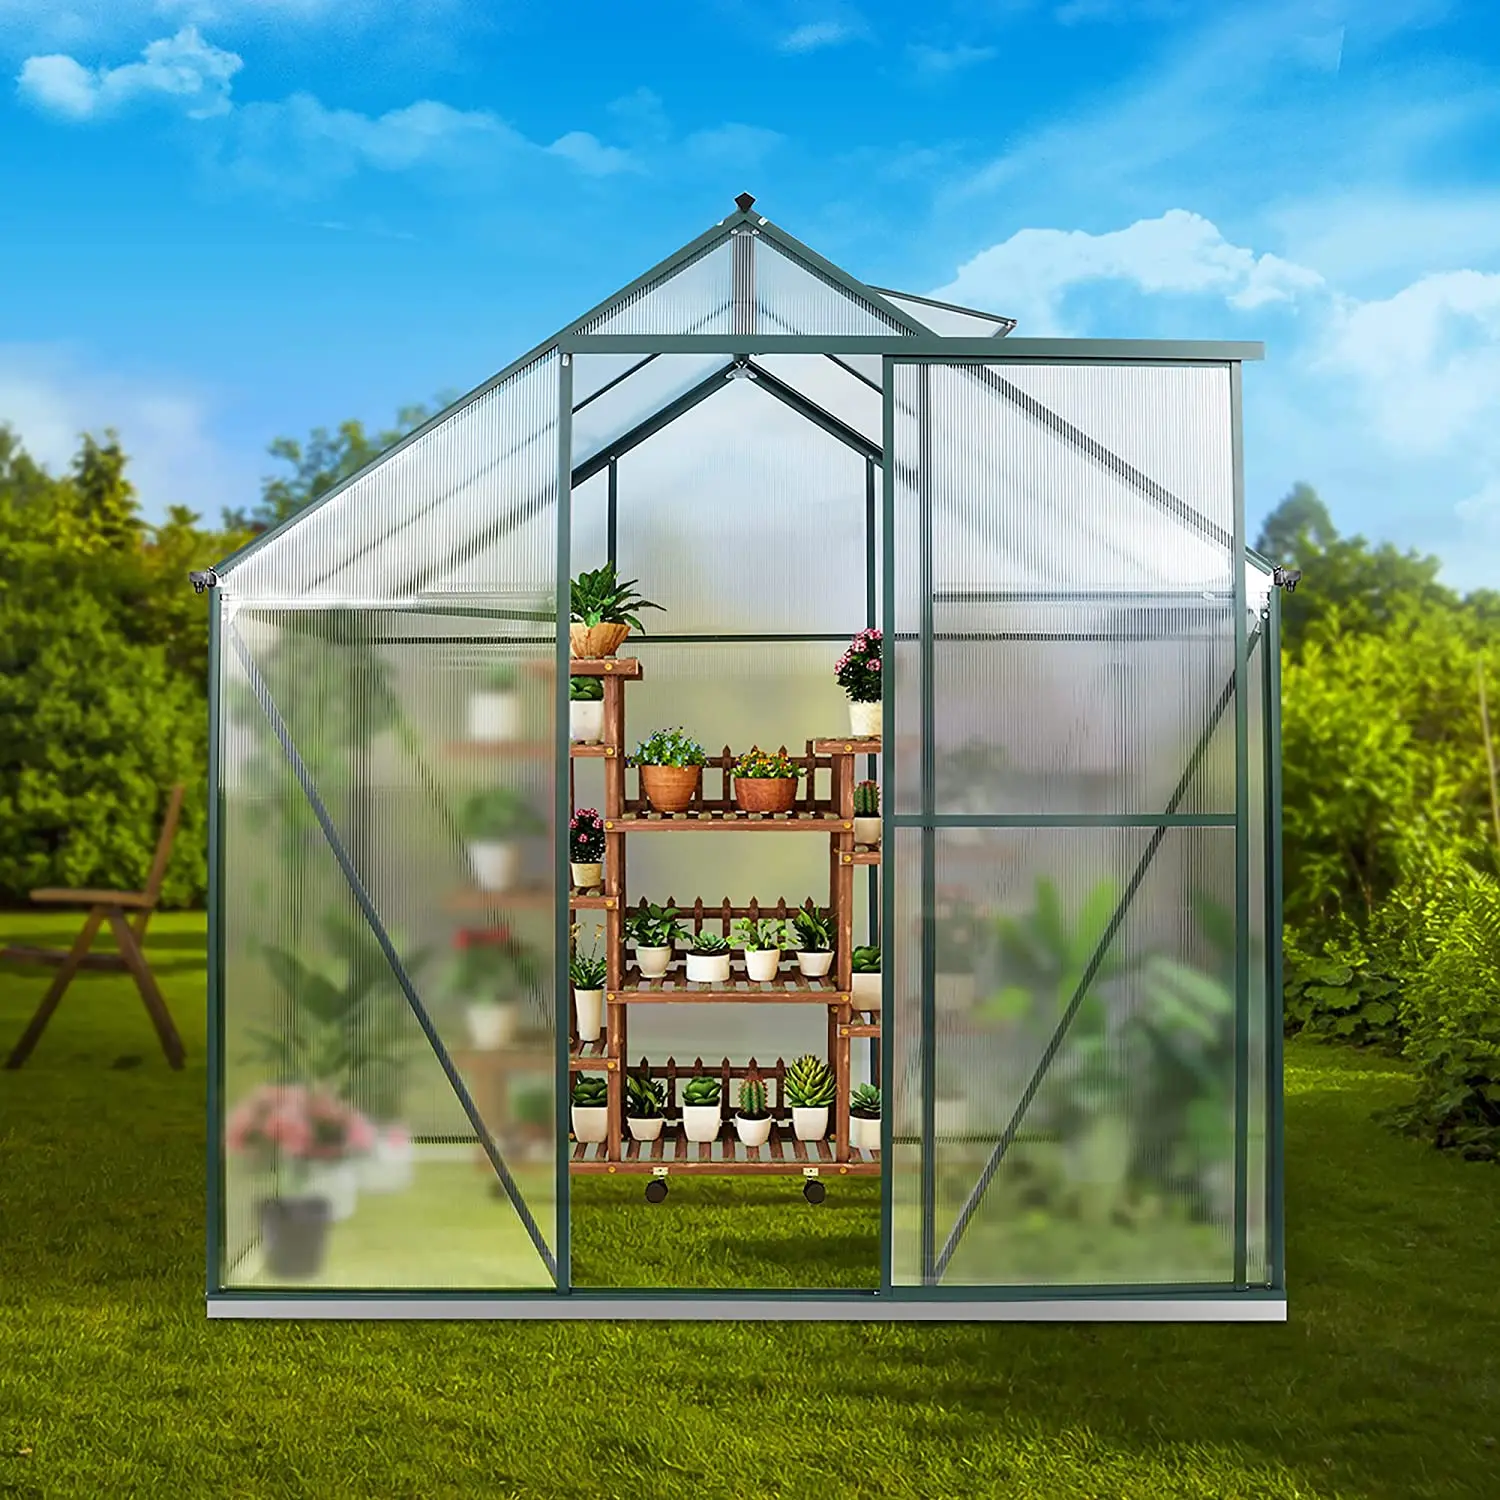 Easy Installation Diy Design Home Garden Use Polycarbonate Fairy Green Houses With Polycarbonate Roof